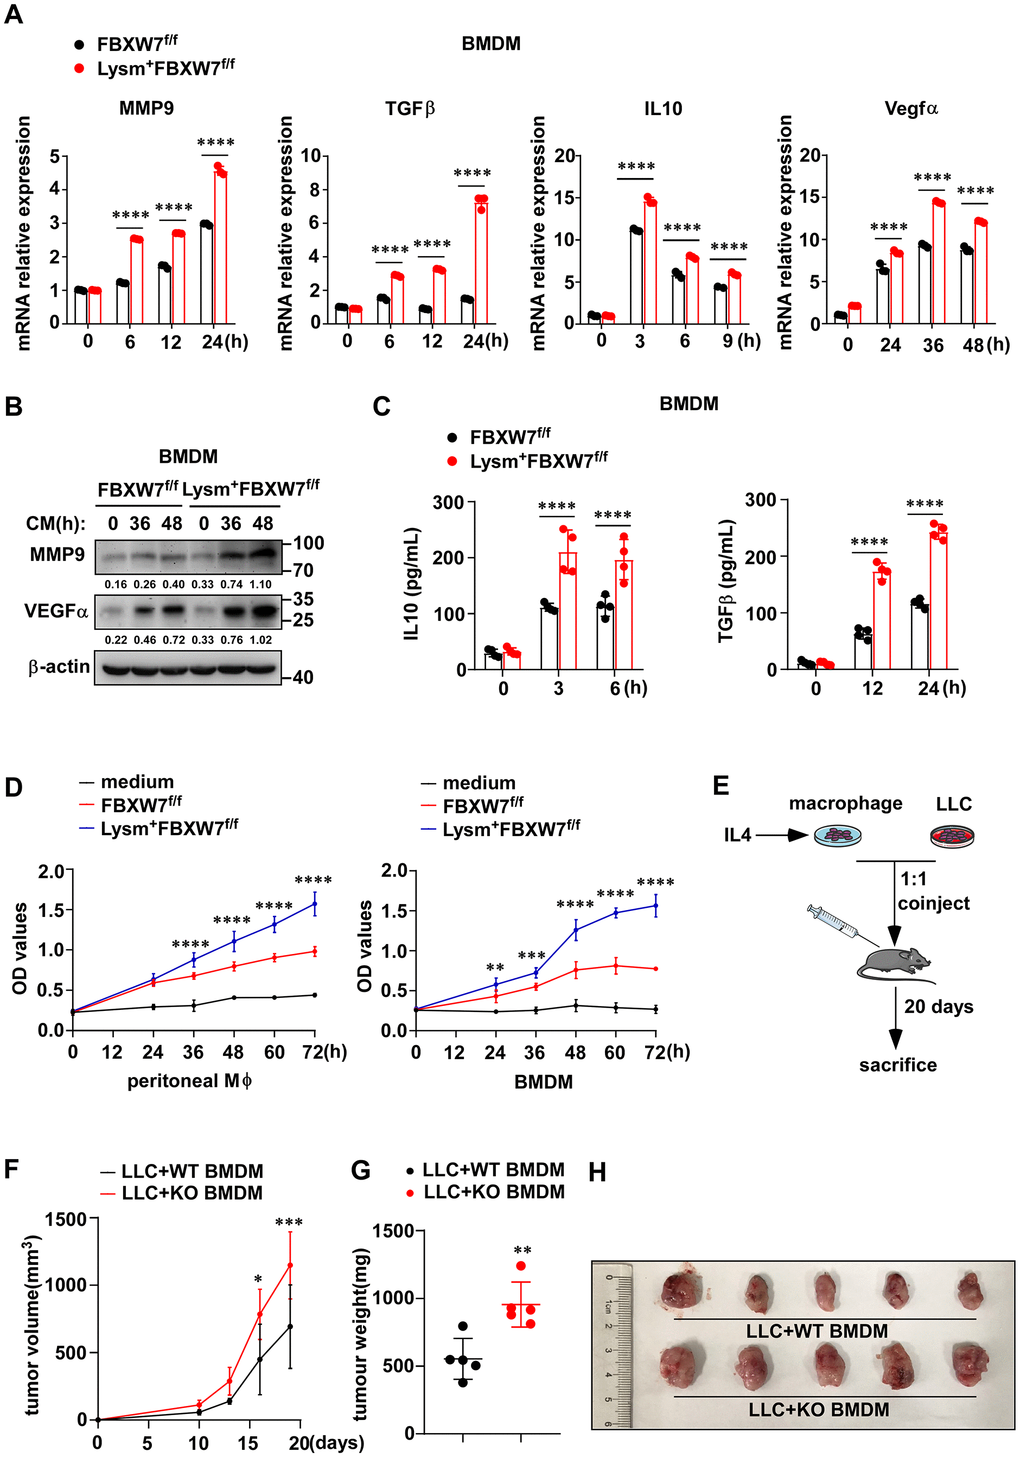 FBXW7 knockout promotes macrophage expressing pro-tumoral factors. (A) BMDMs from FBXW7f/f and Lysm+FBXW7f/f mice were stimulated with conditioned medium, and the mRNA expression of MMP9, IL-10, TGFβ, and VEGFα was examined by qRT-PCR. (B) The protein expression of MMP9 and VEGFα in BMDMs incubated with conditioned medium were detected by immunoblotting. (C) The protein levels of IL10 and TGFβ in the supernatant of BMDMs which co-cultured with LLCs for indicated time were measured by ELISA kit. (D) LLCs were cultured in serum-free RPMI-1640, supernatant from IL-4-induced wild-type or FBXW7-knockout macrophages. The proliferation of LLCs in three groups was measured by MTT assay. (E) Schematic representation of the co-injection experimental approach. IL4-induced BMDMs derived from FBXW7f/f and Lysm+FBXW7f/f mice were mixed with LLCs at a ratio of 1:1 and injected subcutaneously into healthy wild-type C57BL/6 mice. (F, G) The volume (F) and weight (G) of tumors in co-injection mice. (H) The appearance of tumors in two groups inoculated with a mixture of M2 macrophages and LLCs. Data are shown as the mean ± SD and are representative of three independent experiments. *P P P P A, C, D, F) and Student’s t test (G)).